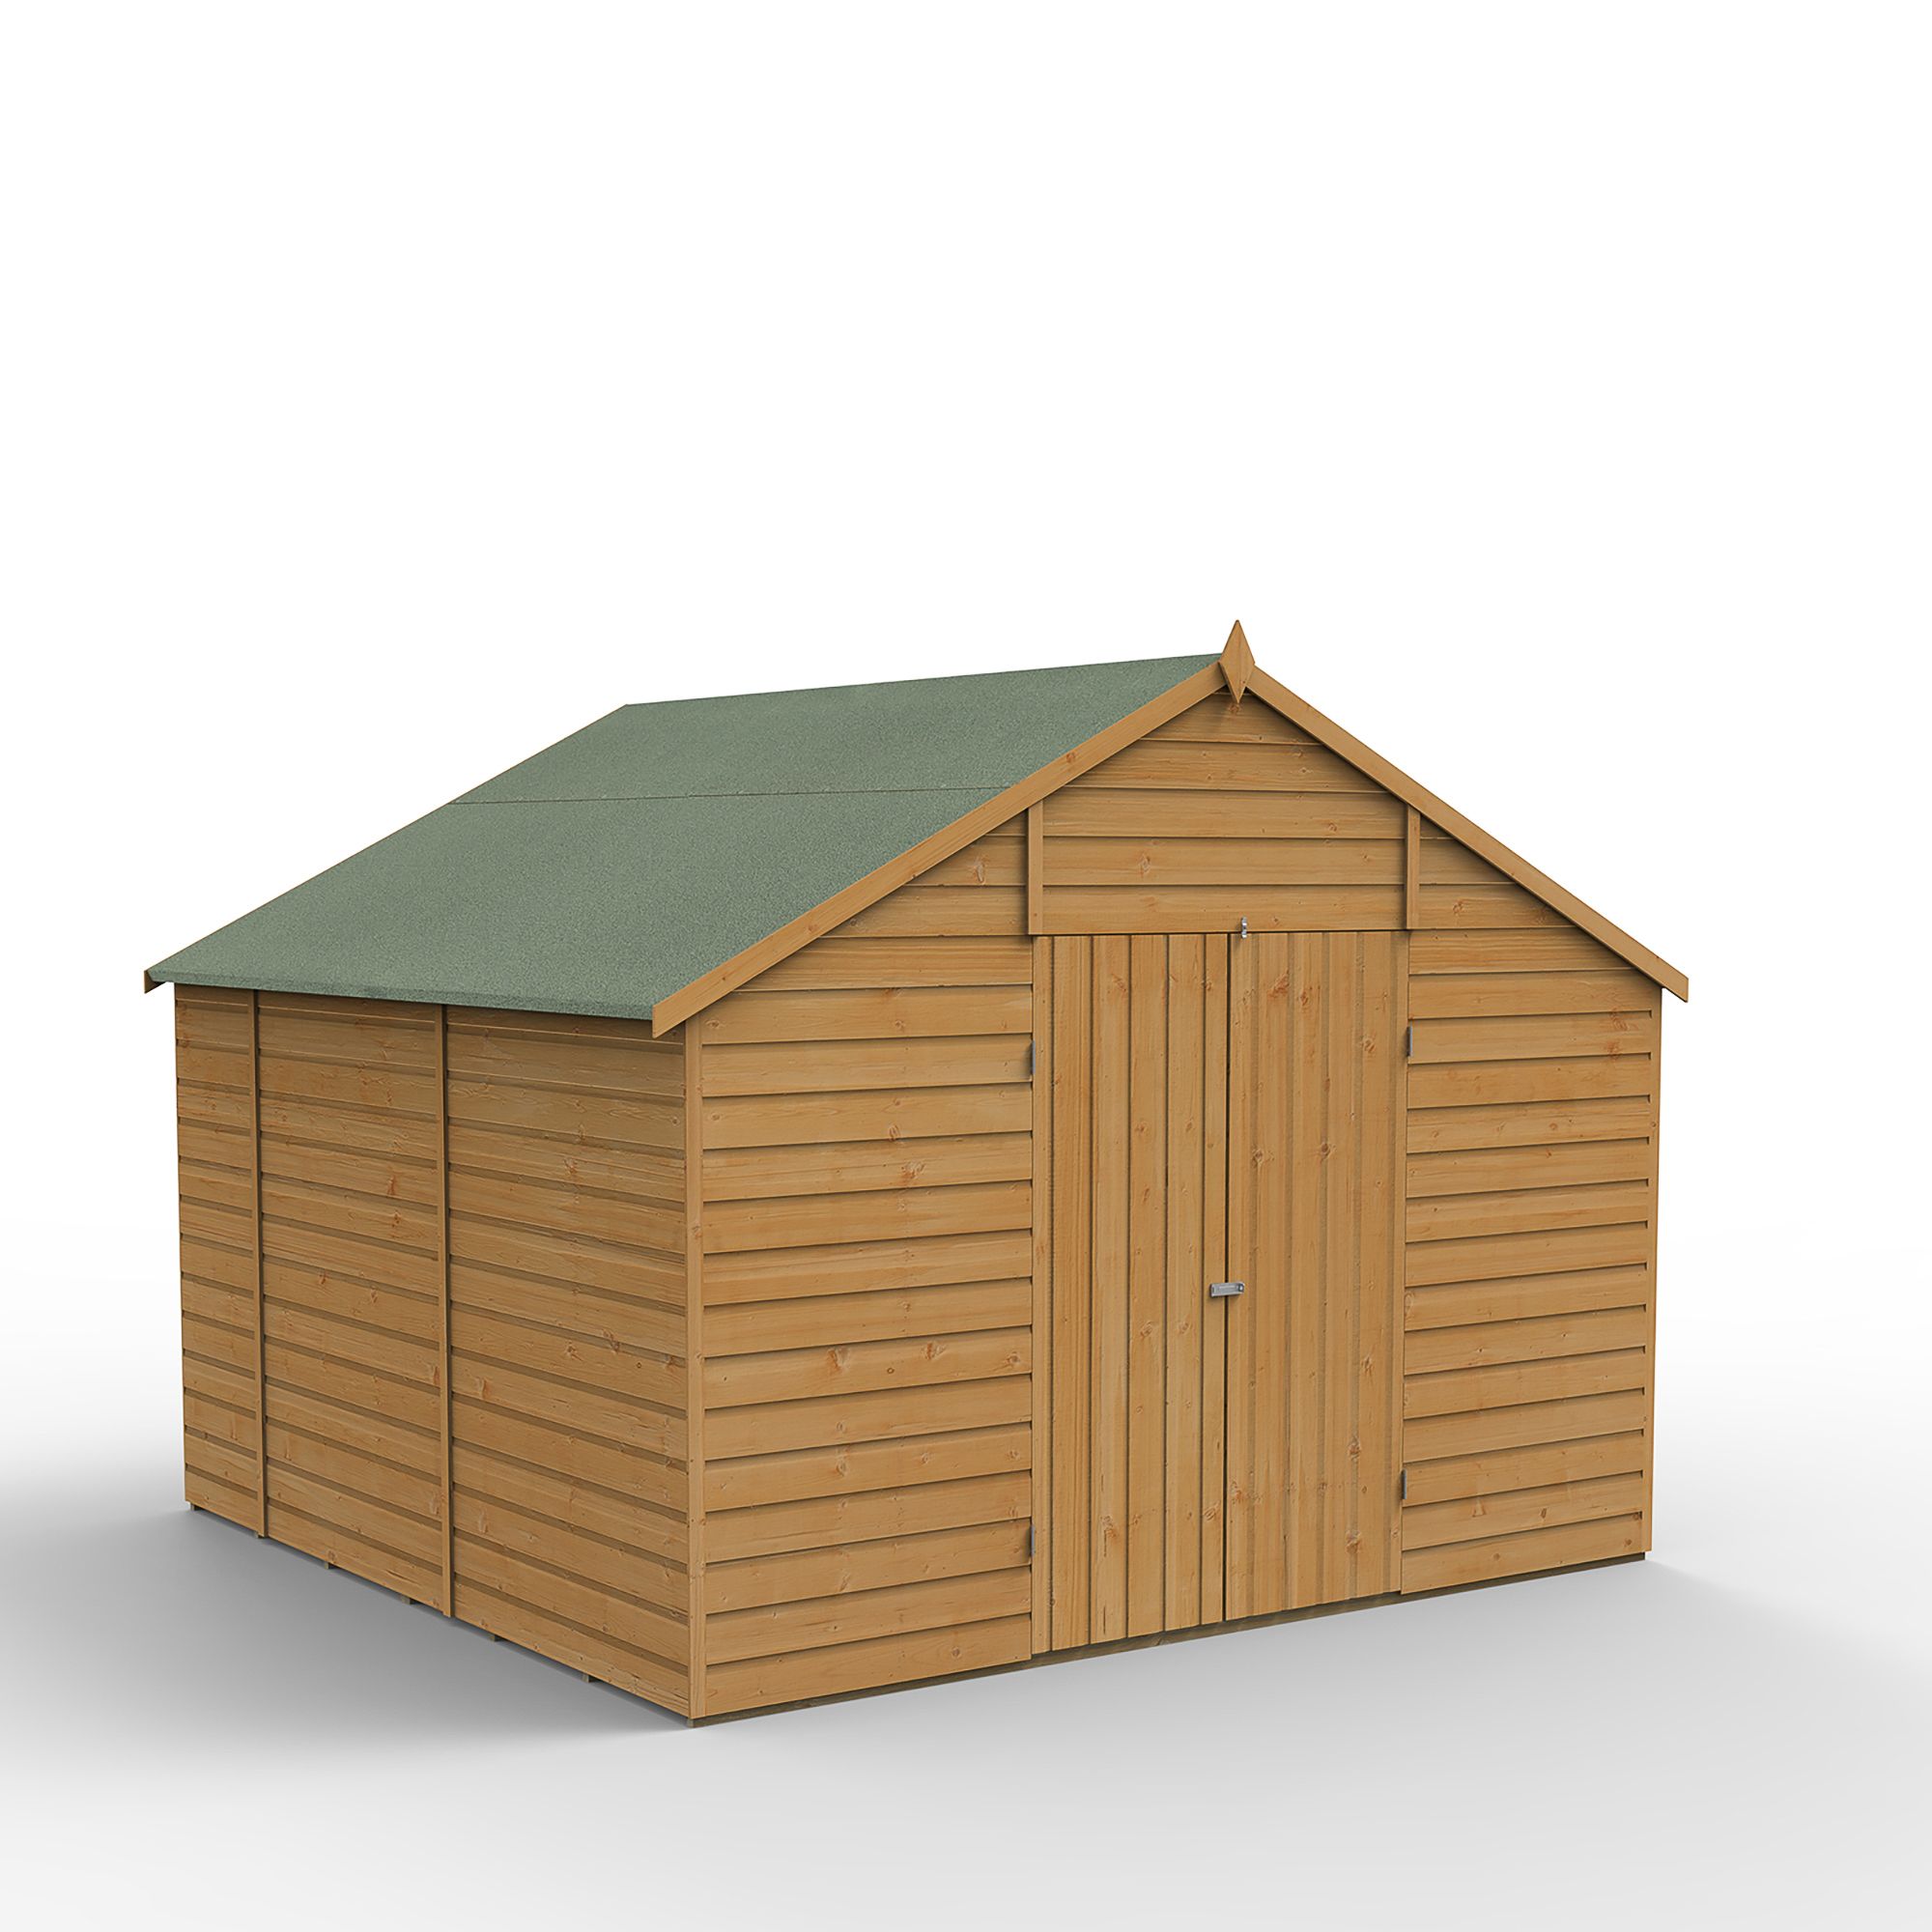 Forest Garden Shiplap 10x10 ft Apex Wooden 2 door Shed with floor (Base included) - Assembly service included